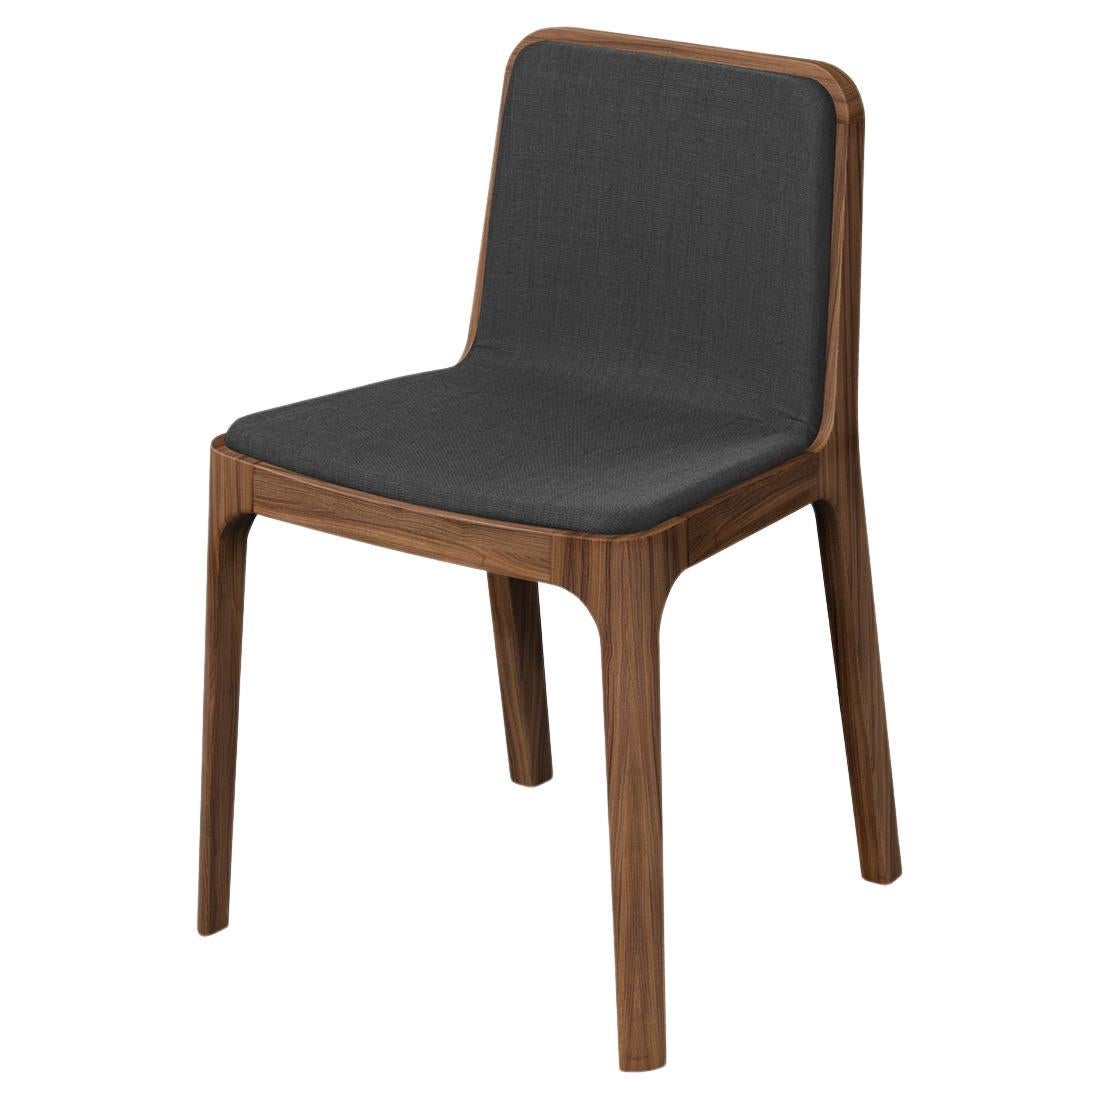 Minimalist Modern Chair, Ash Wood / Walnut Stained Finnishing Fabric Upholstery For Sale